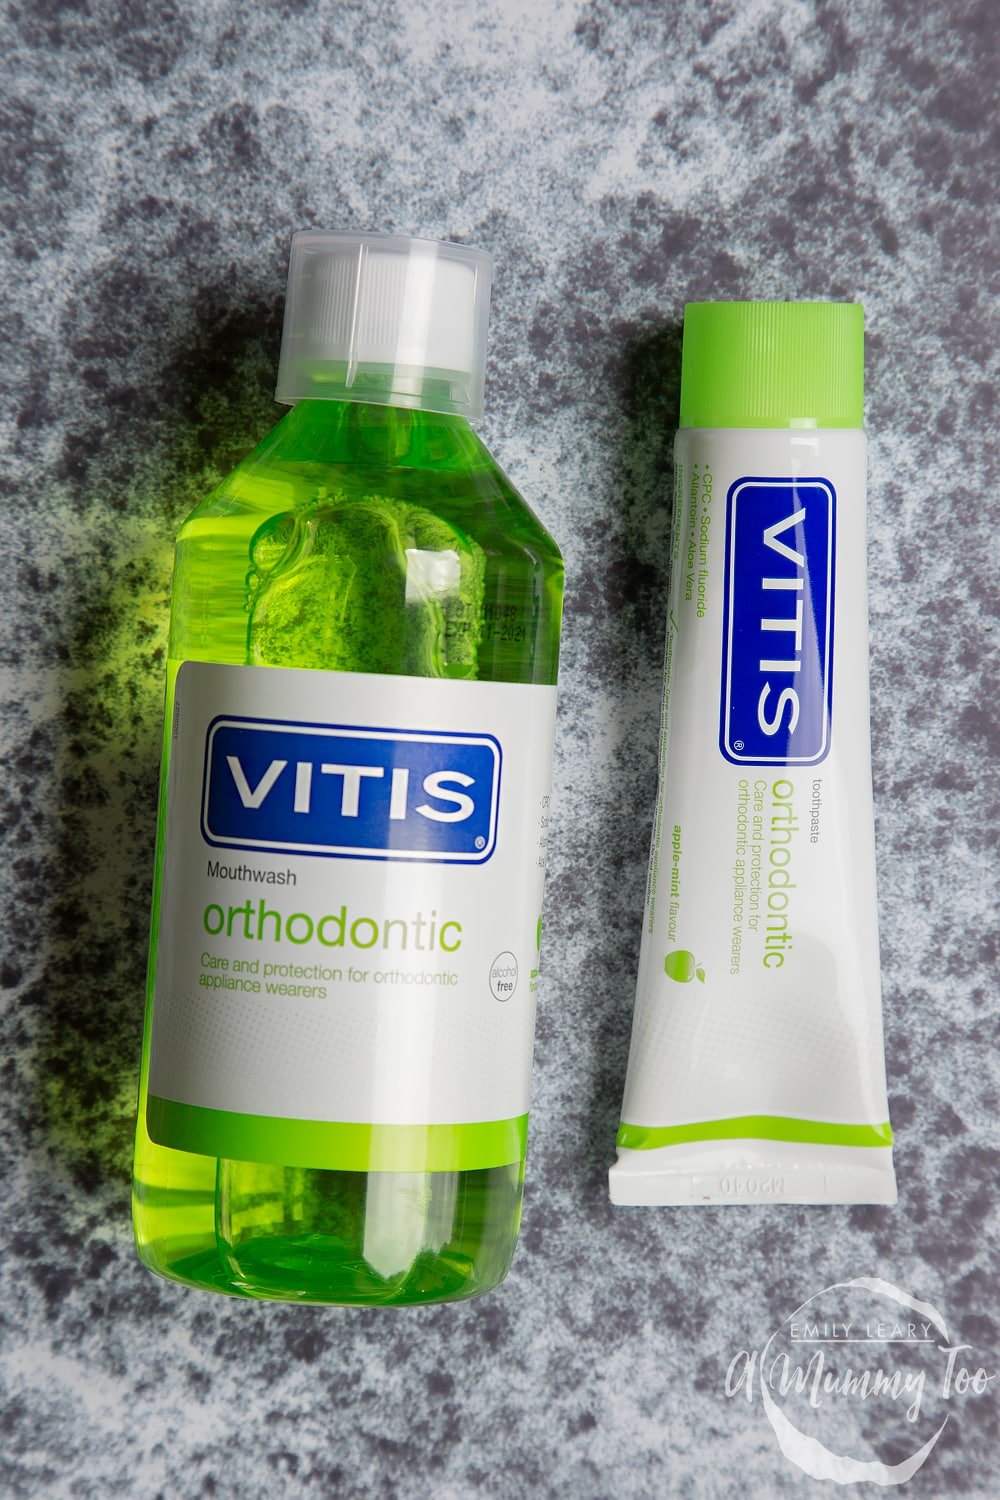 vitis orthodontic mouthwash and toothpaste